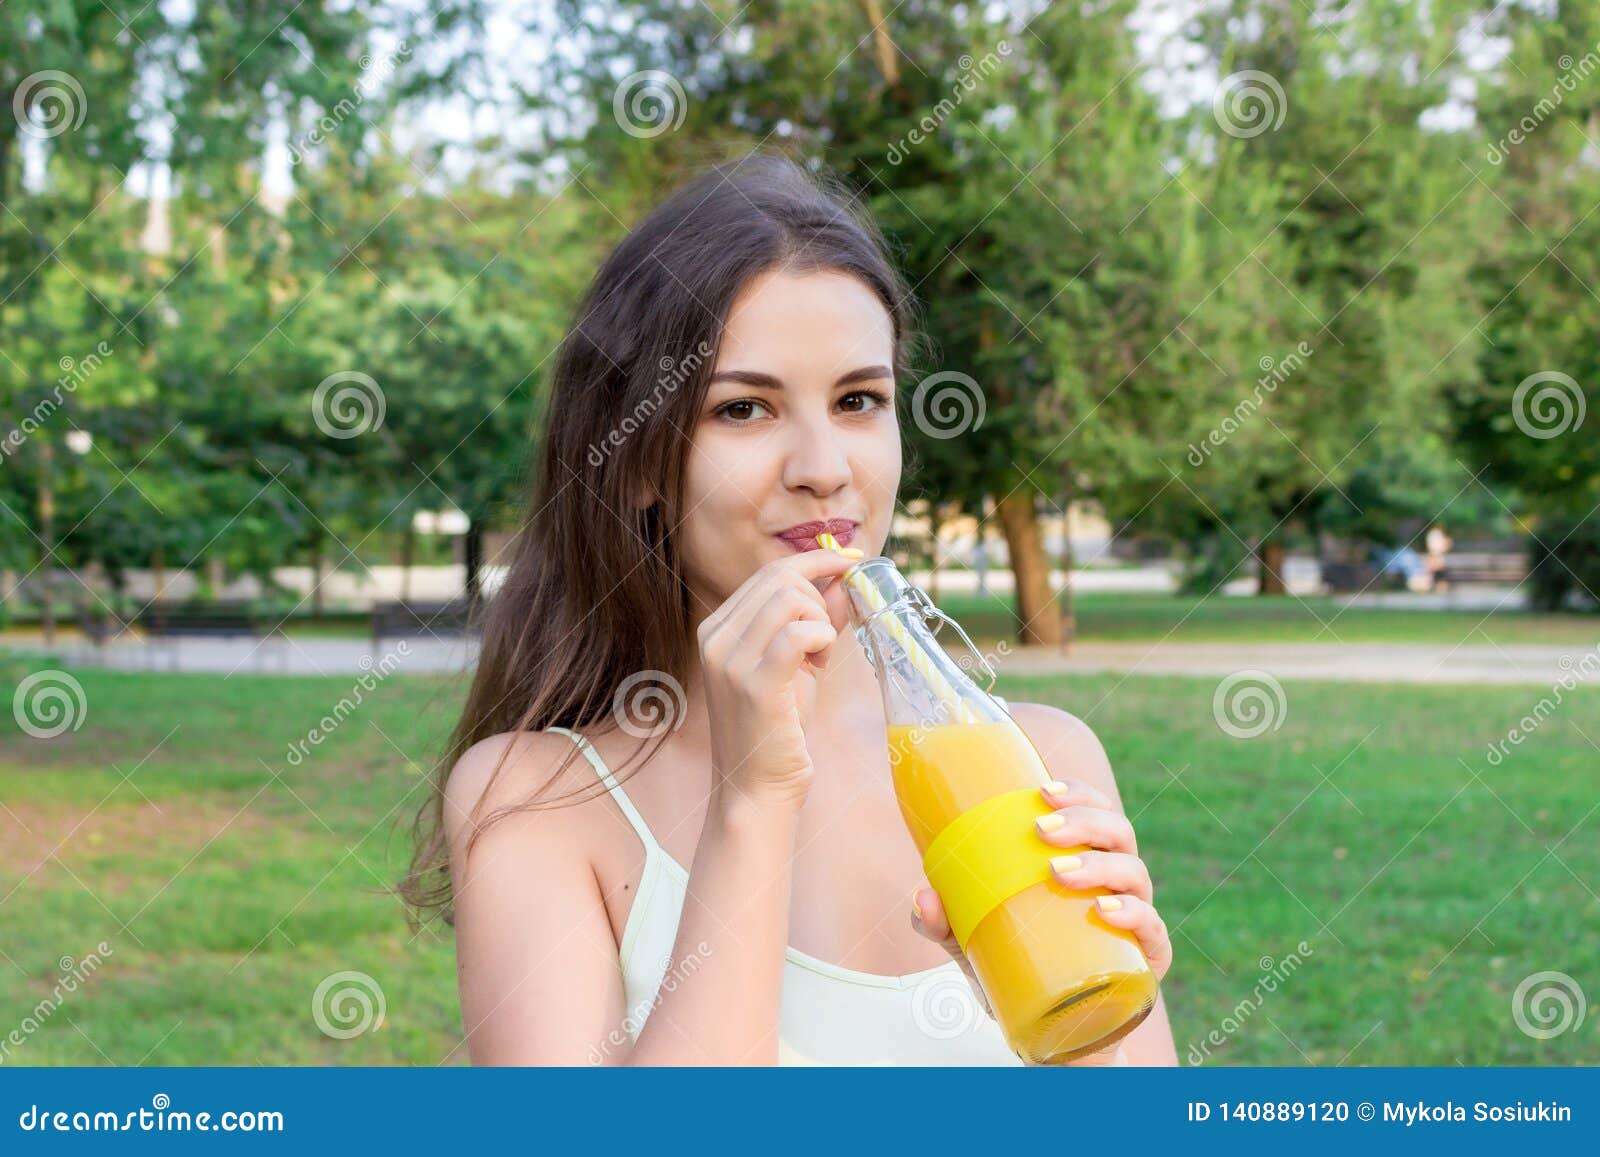 Attractive Girl Is Drinking Fresh Juice Through The Straw Outdoors Pretty Woman Is Holding A